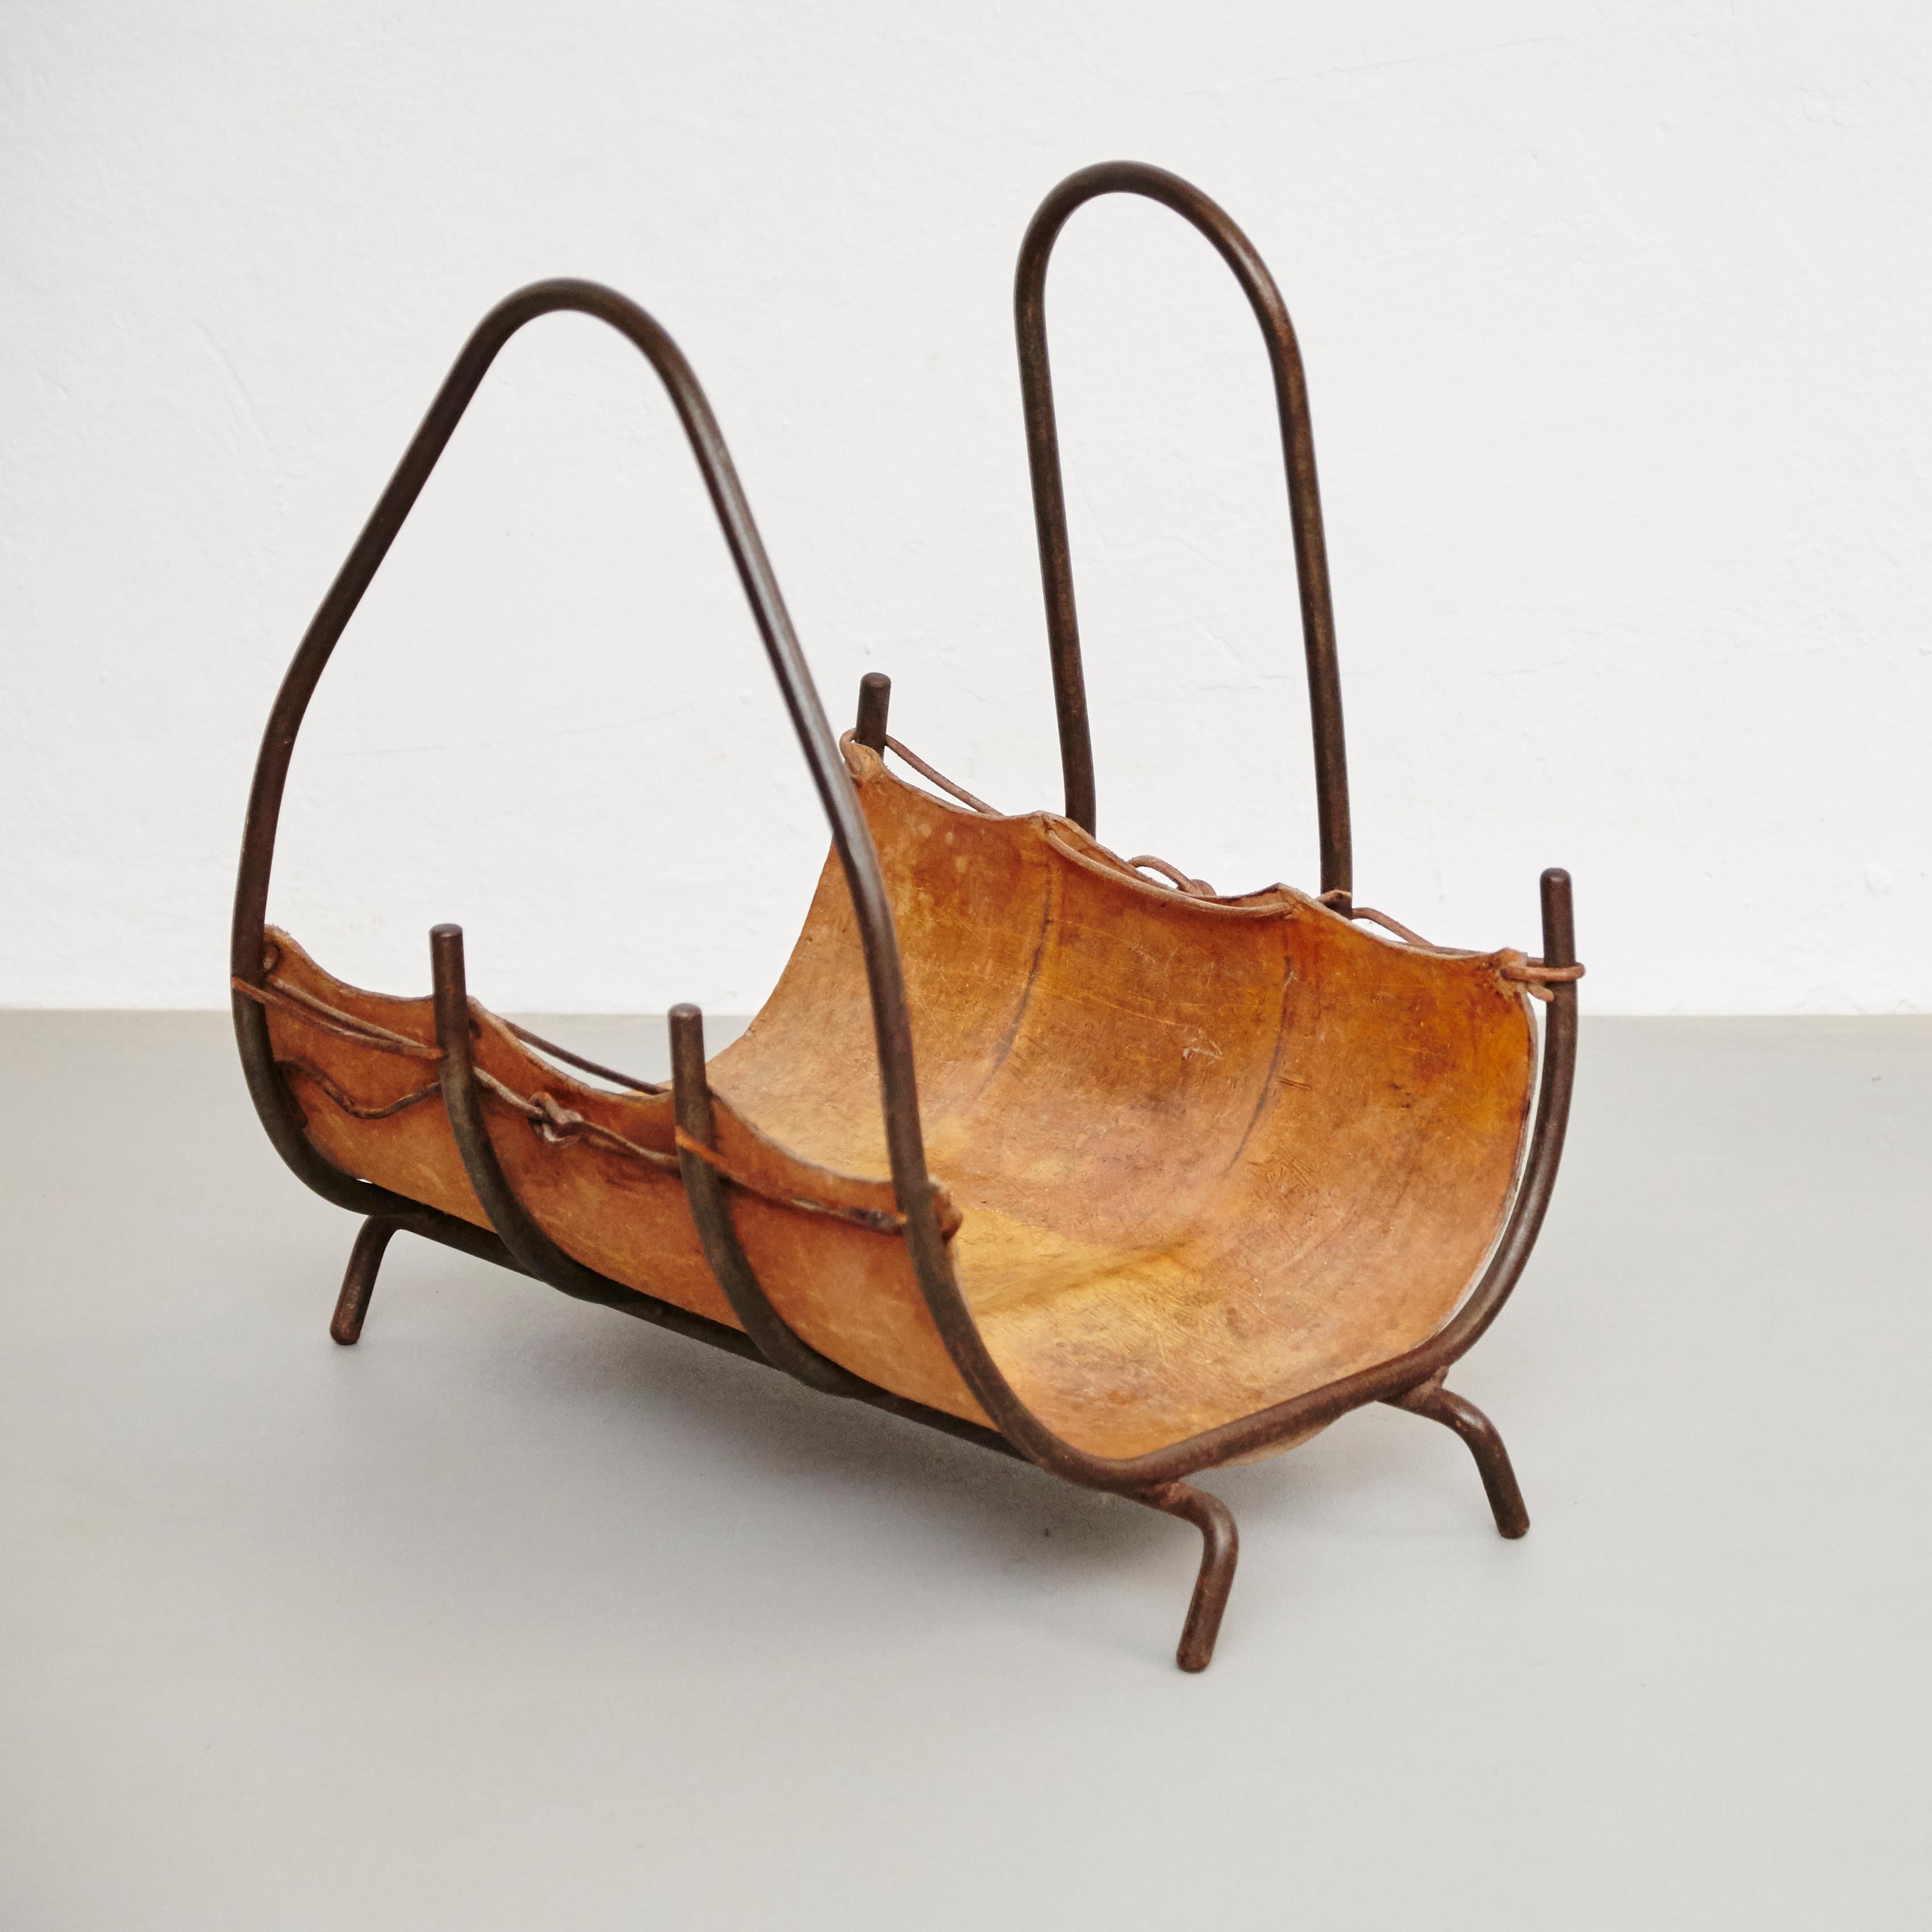 Antique firewood basket by unknown designer, circa 1960. In good condition, with minor wear consistent with age and use, preserving a beautiful patina.

Materials:
Leather
Metal

Dimensions:
D 54 cm x W 42 cm x H 55 cm.